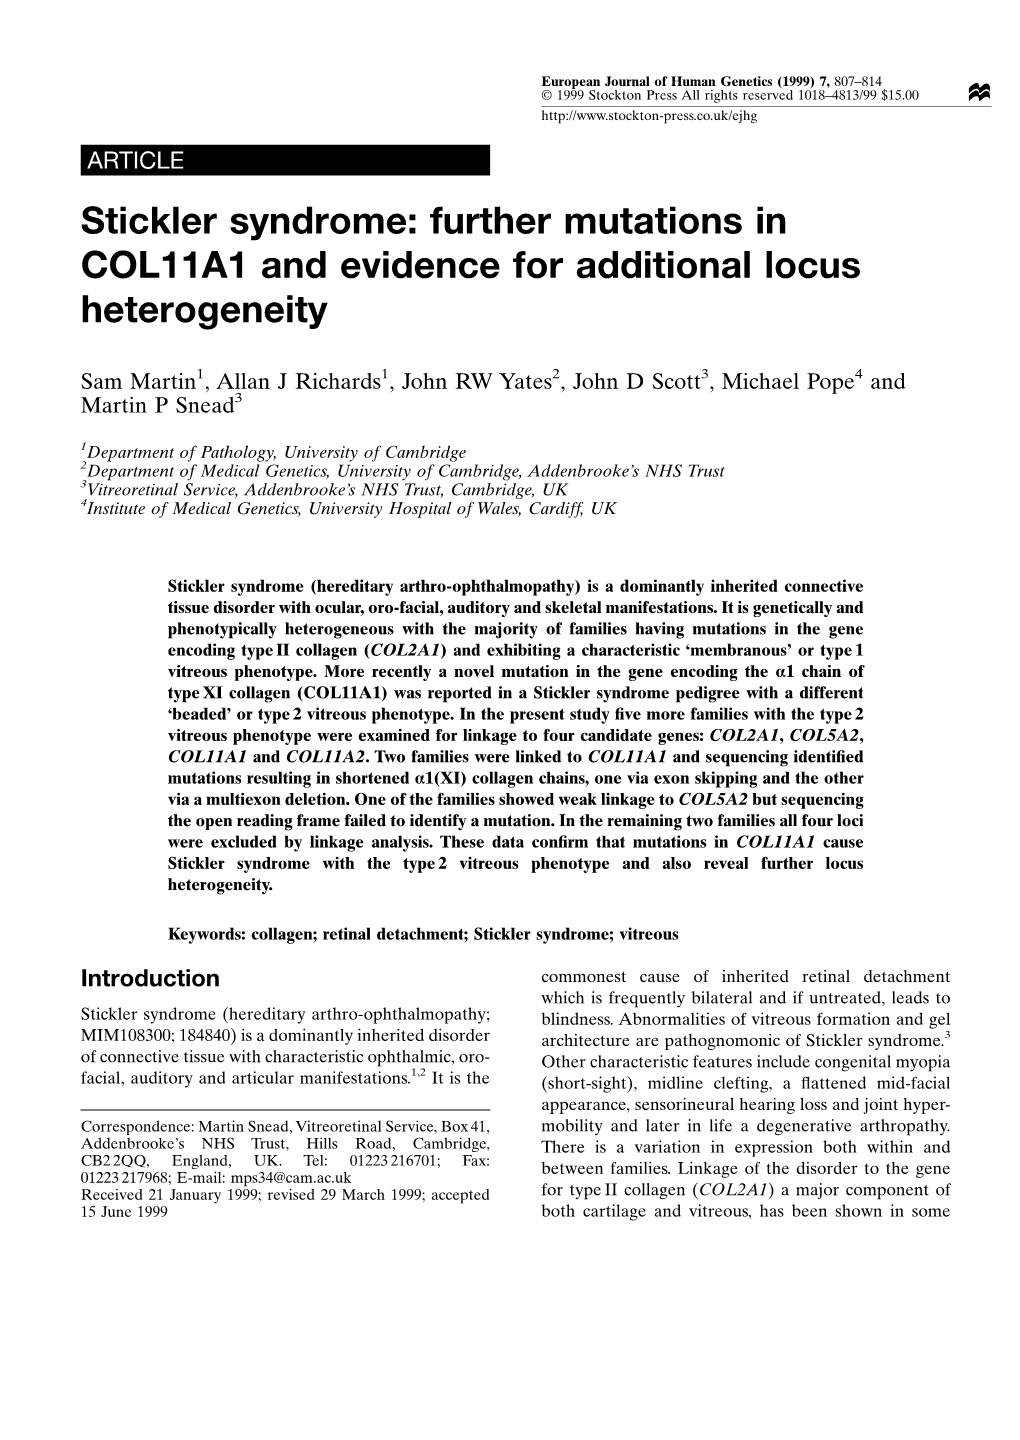 Stickler Syndrome: Further Mutations in COL11A1 and Evidence for Additional Locus Heterogeneity